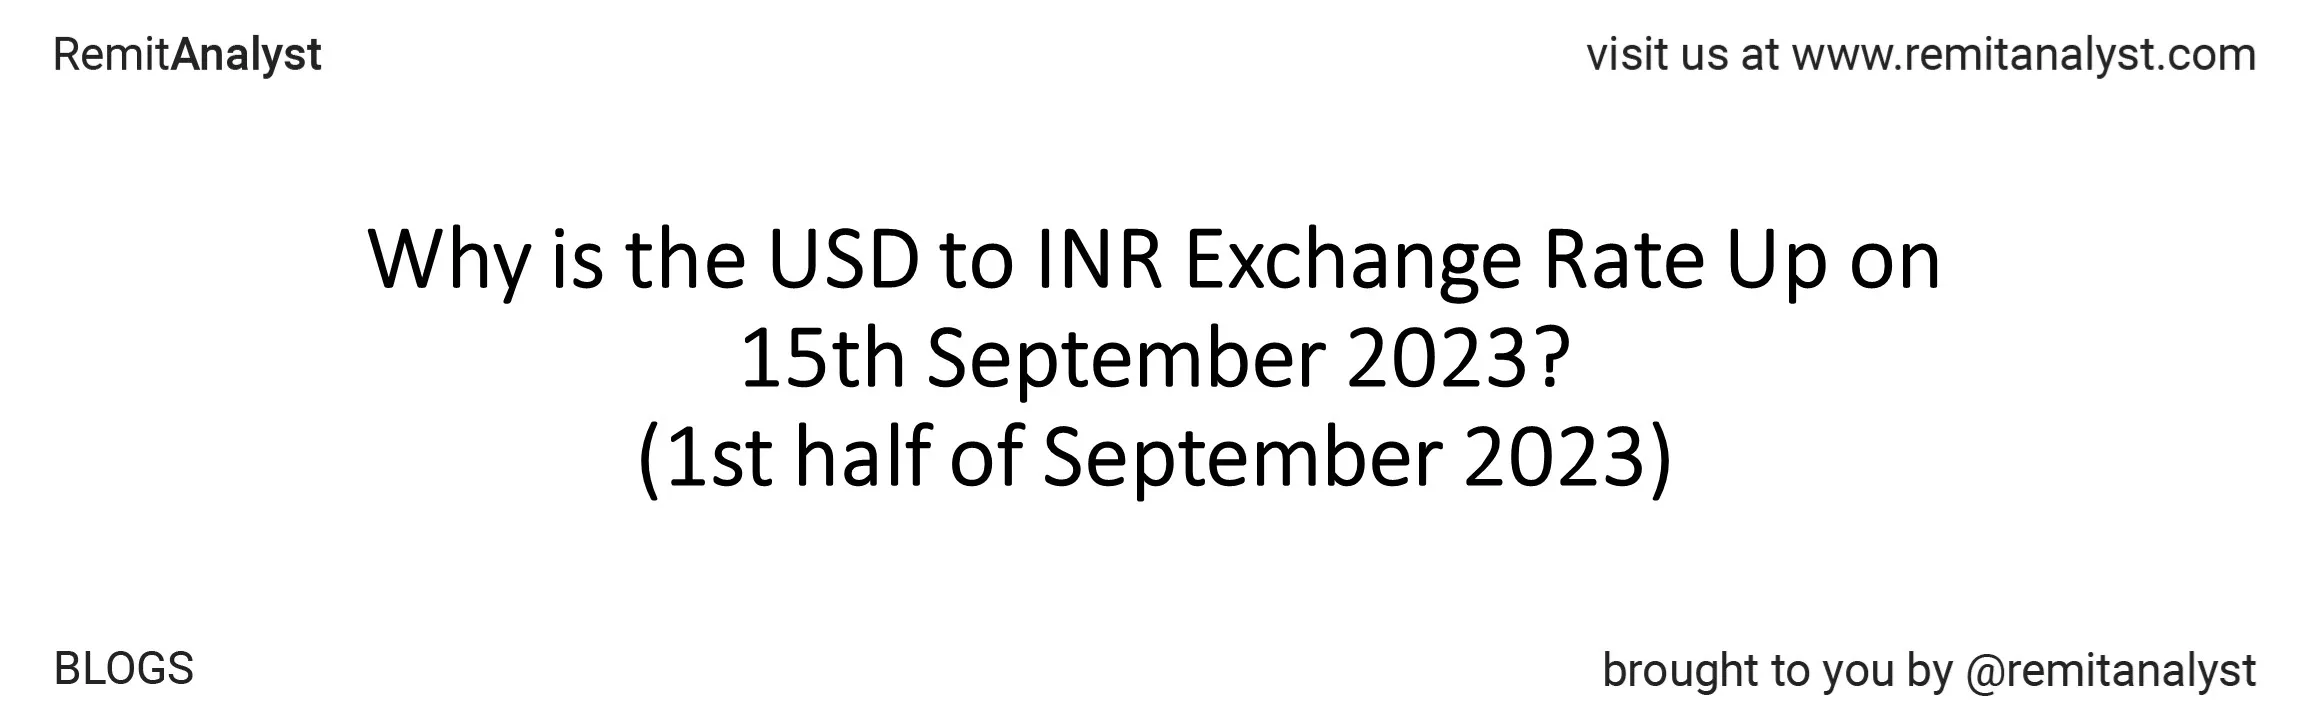 usd-to-inr-exchange-rate-1-sep-2023-to-15-sep-2023-title